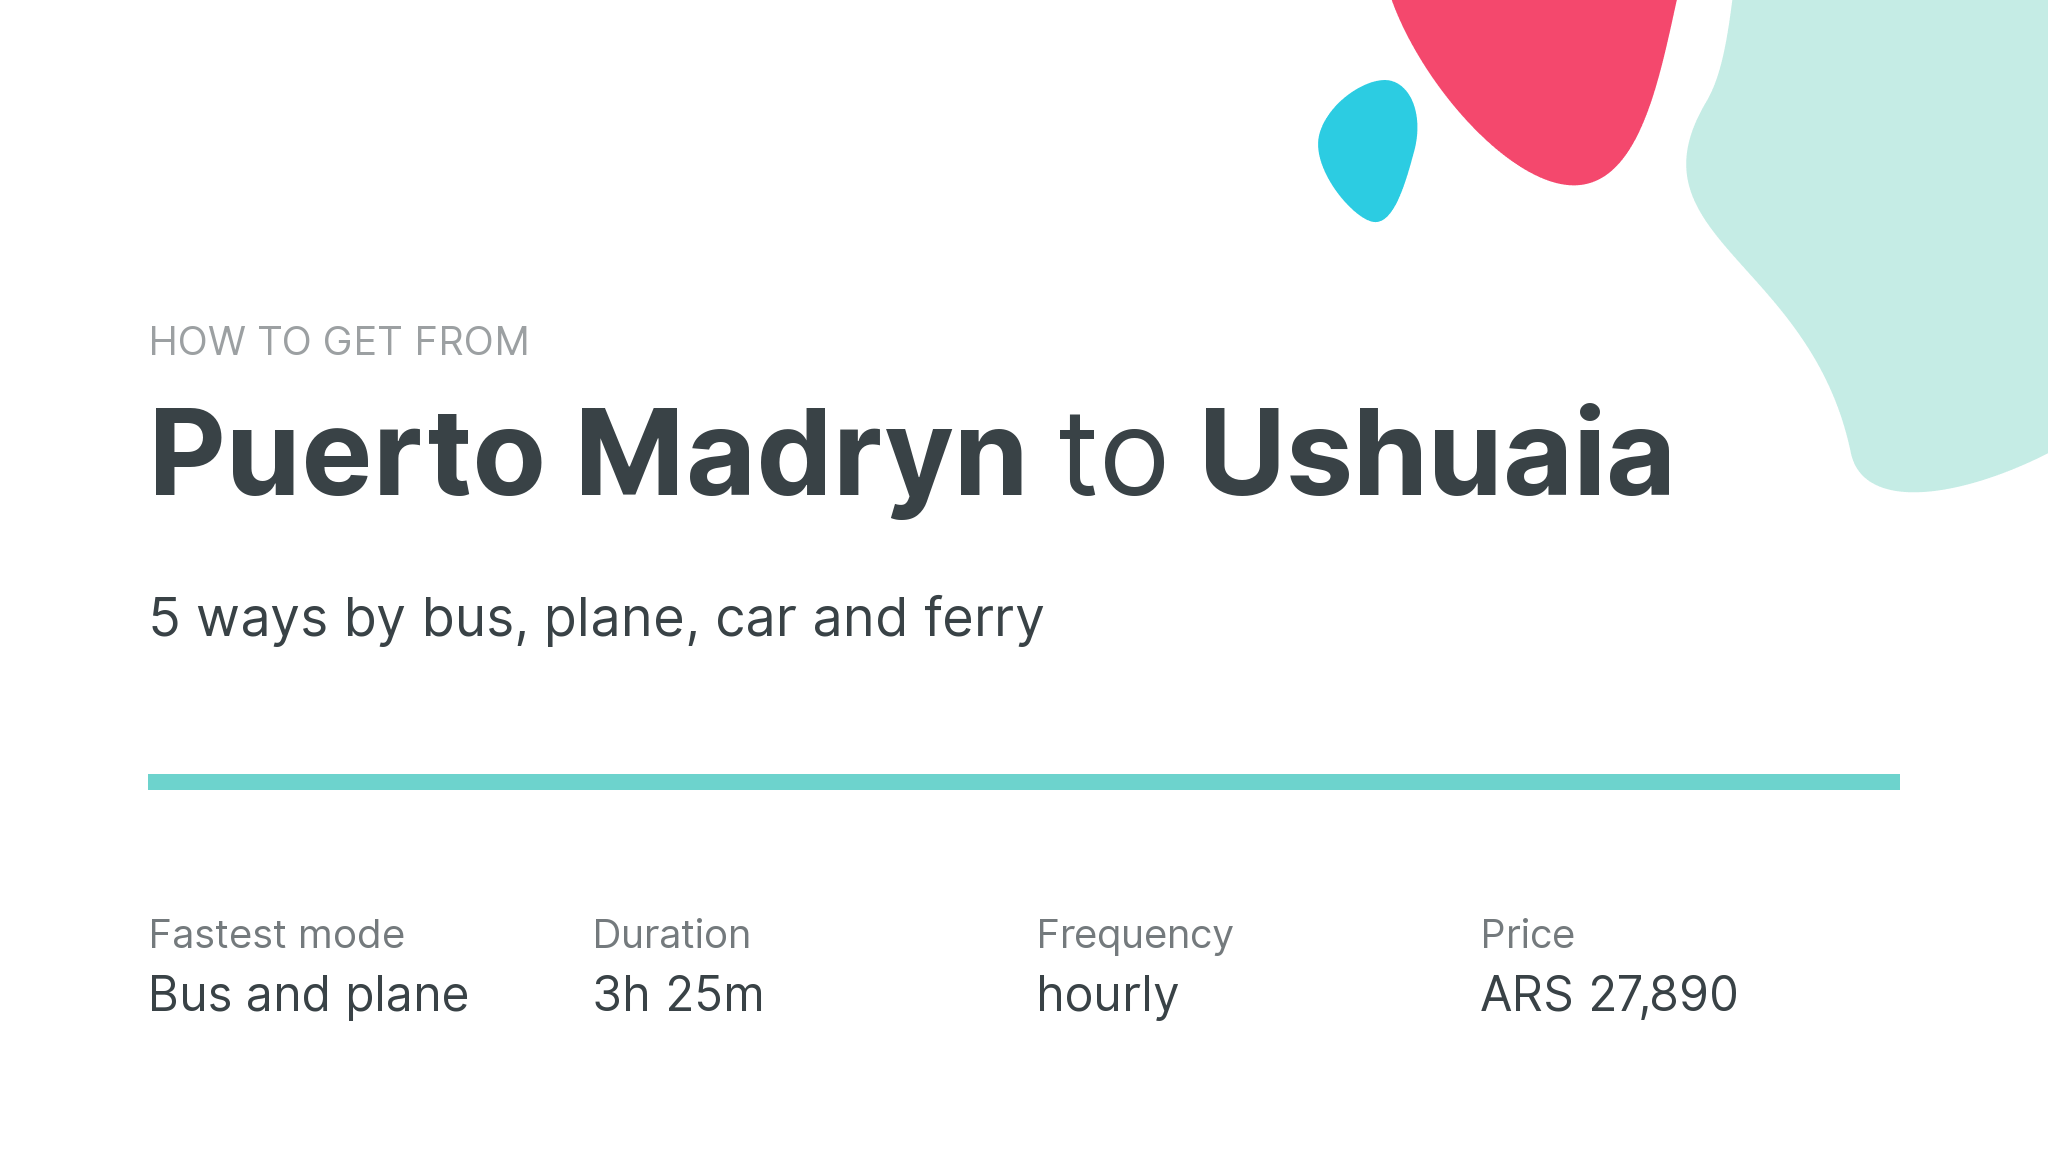 How do I get from Puerto Madryn to Ushuaia